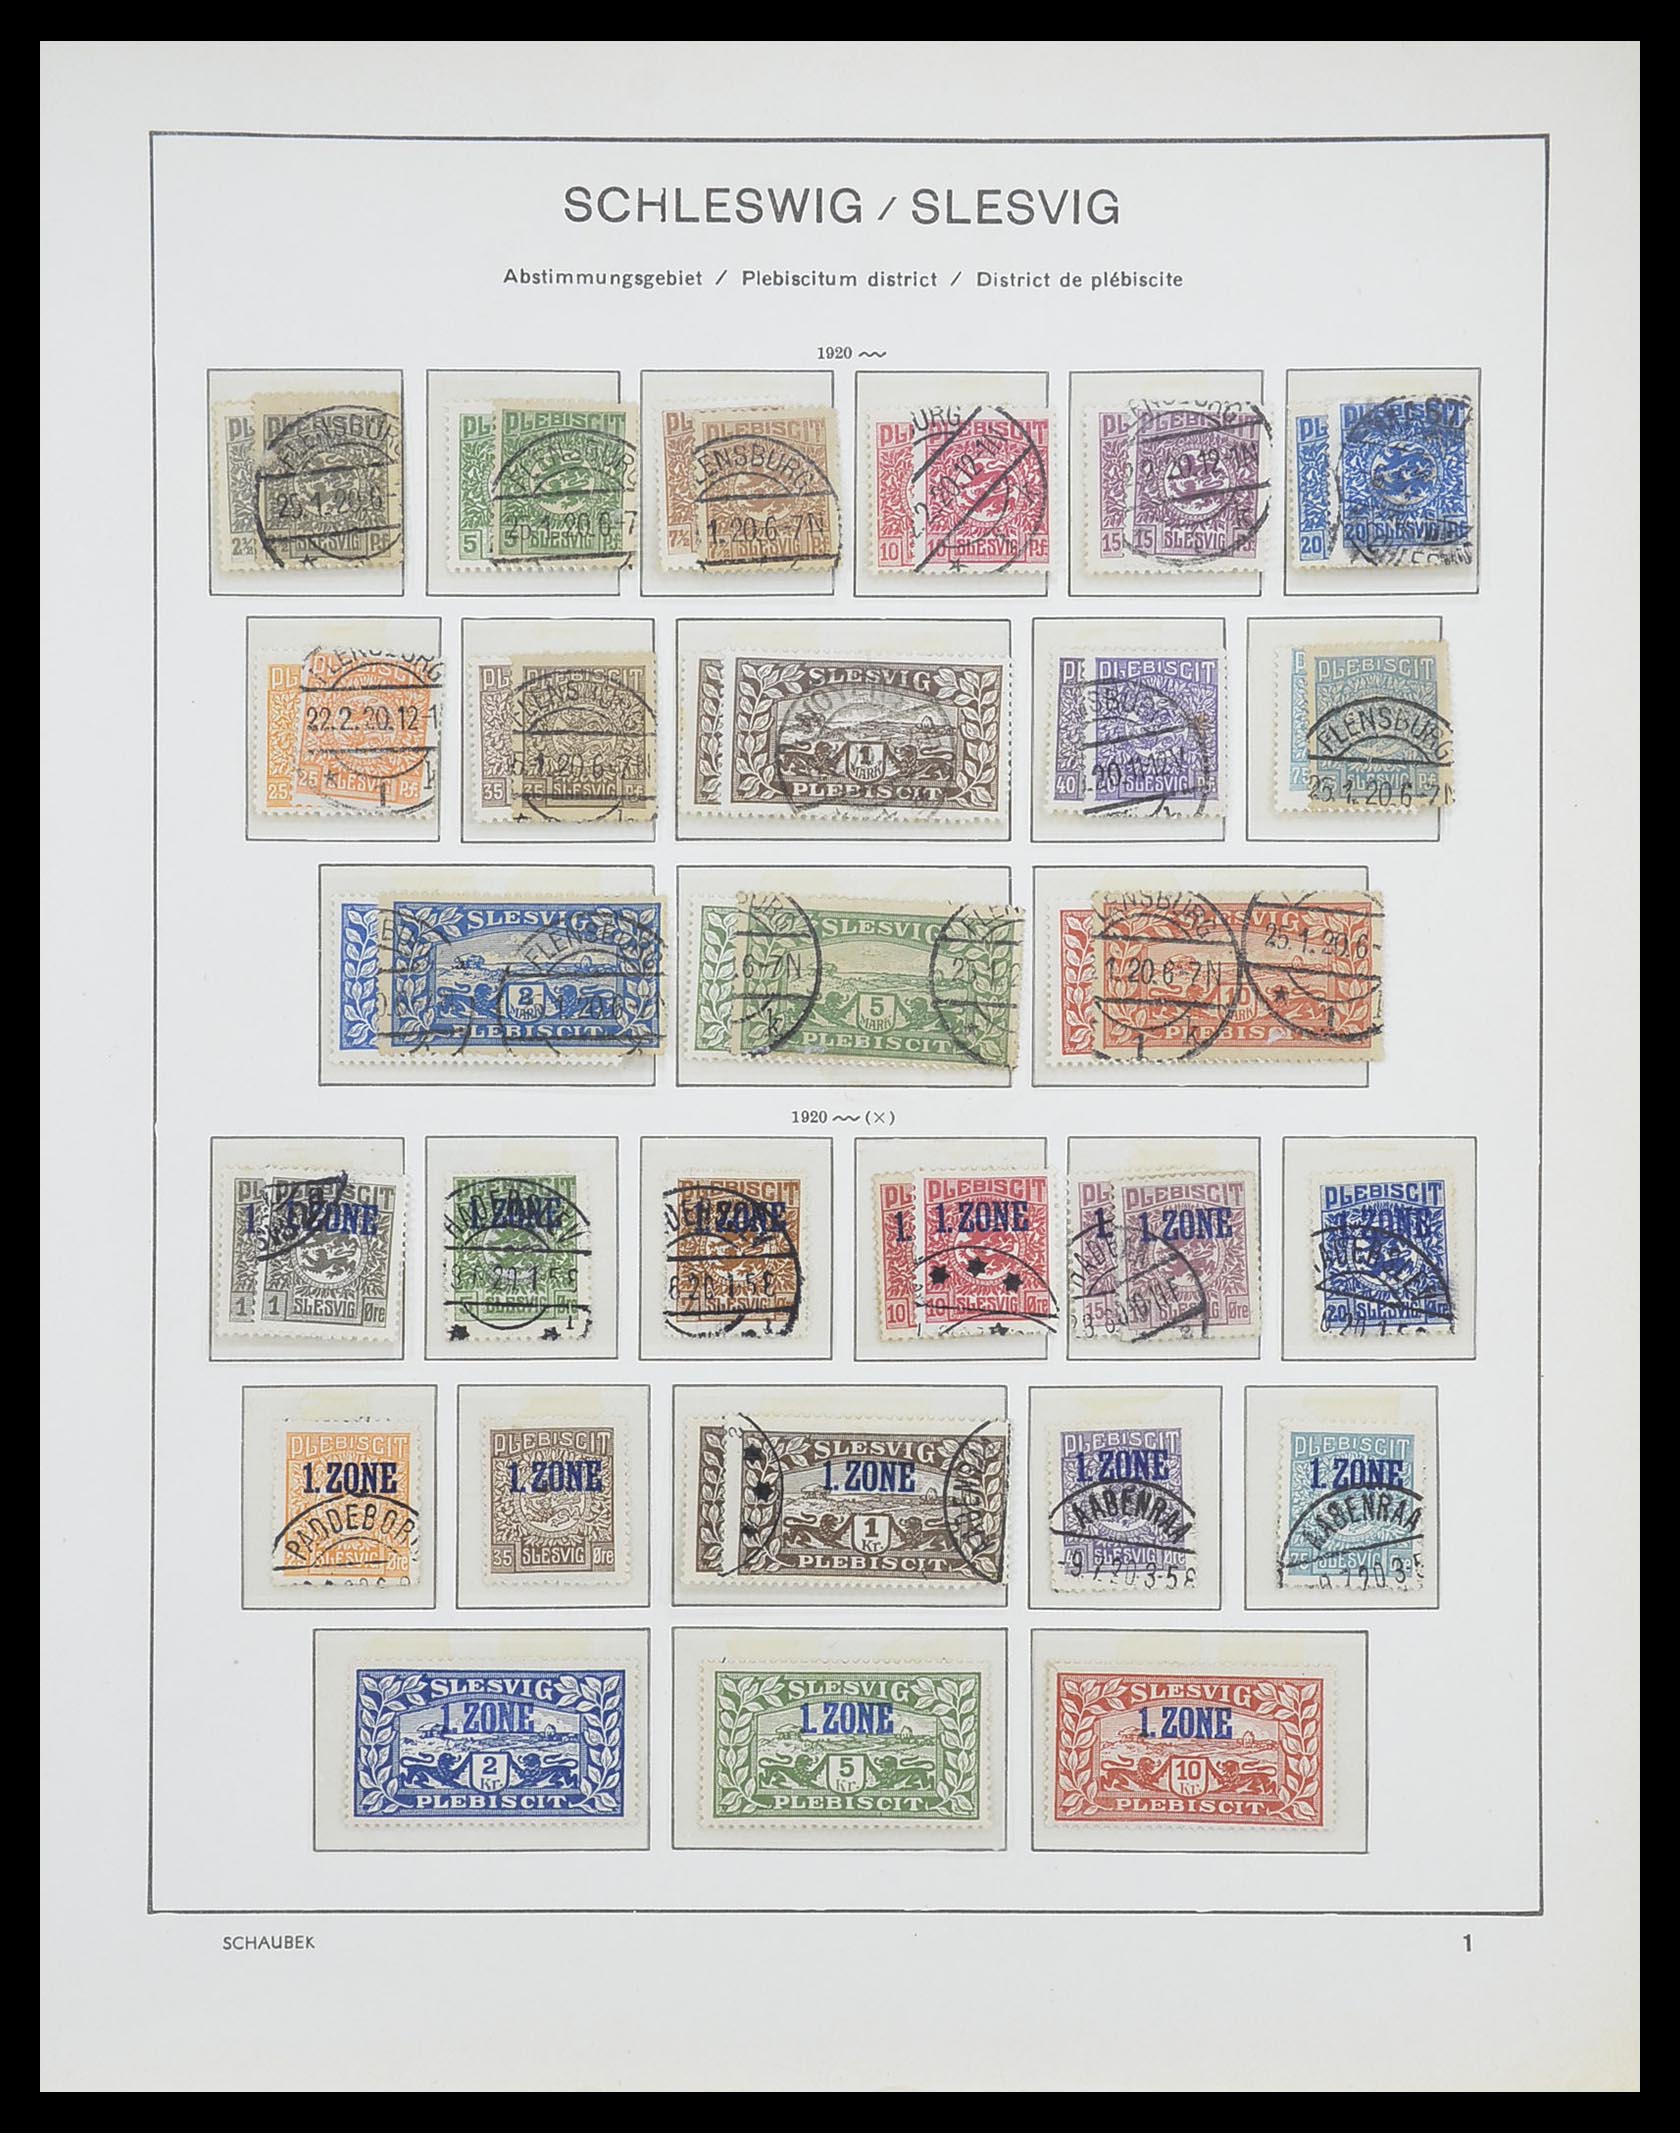 33503 011 - Stamp collection 33503 German territories 1920.